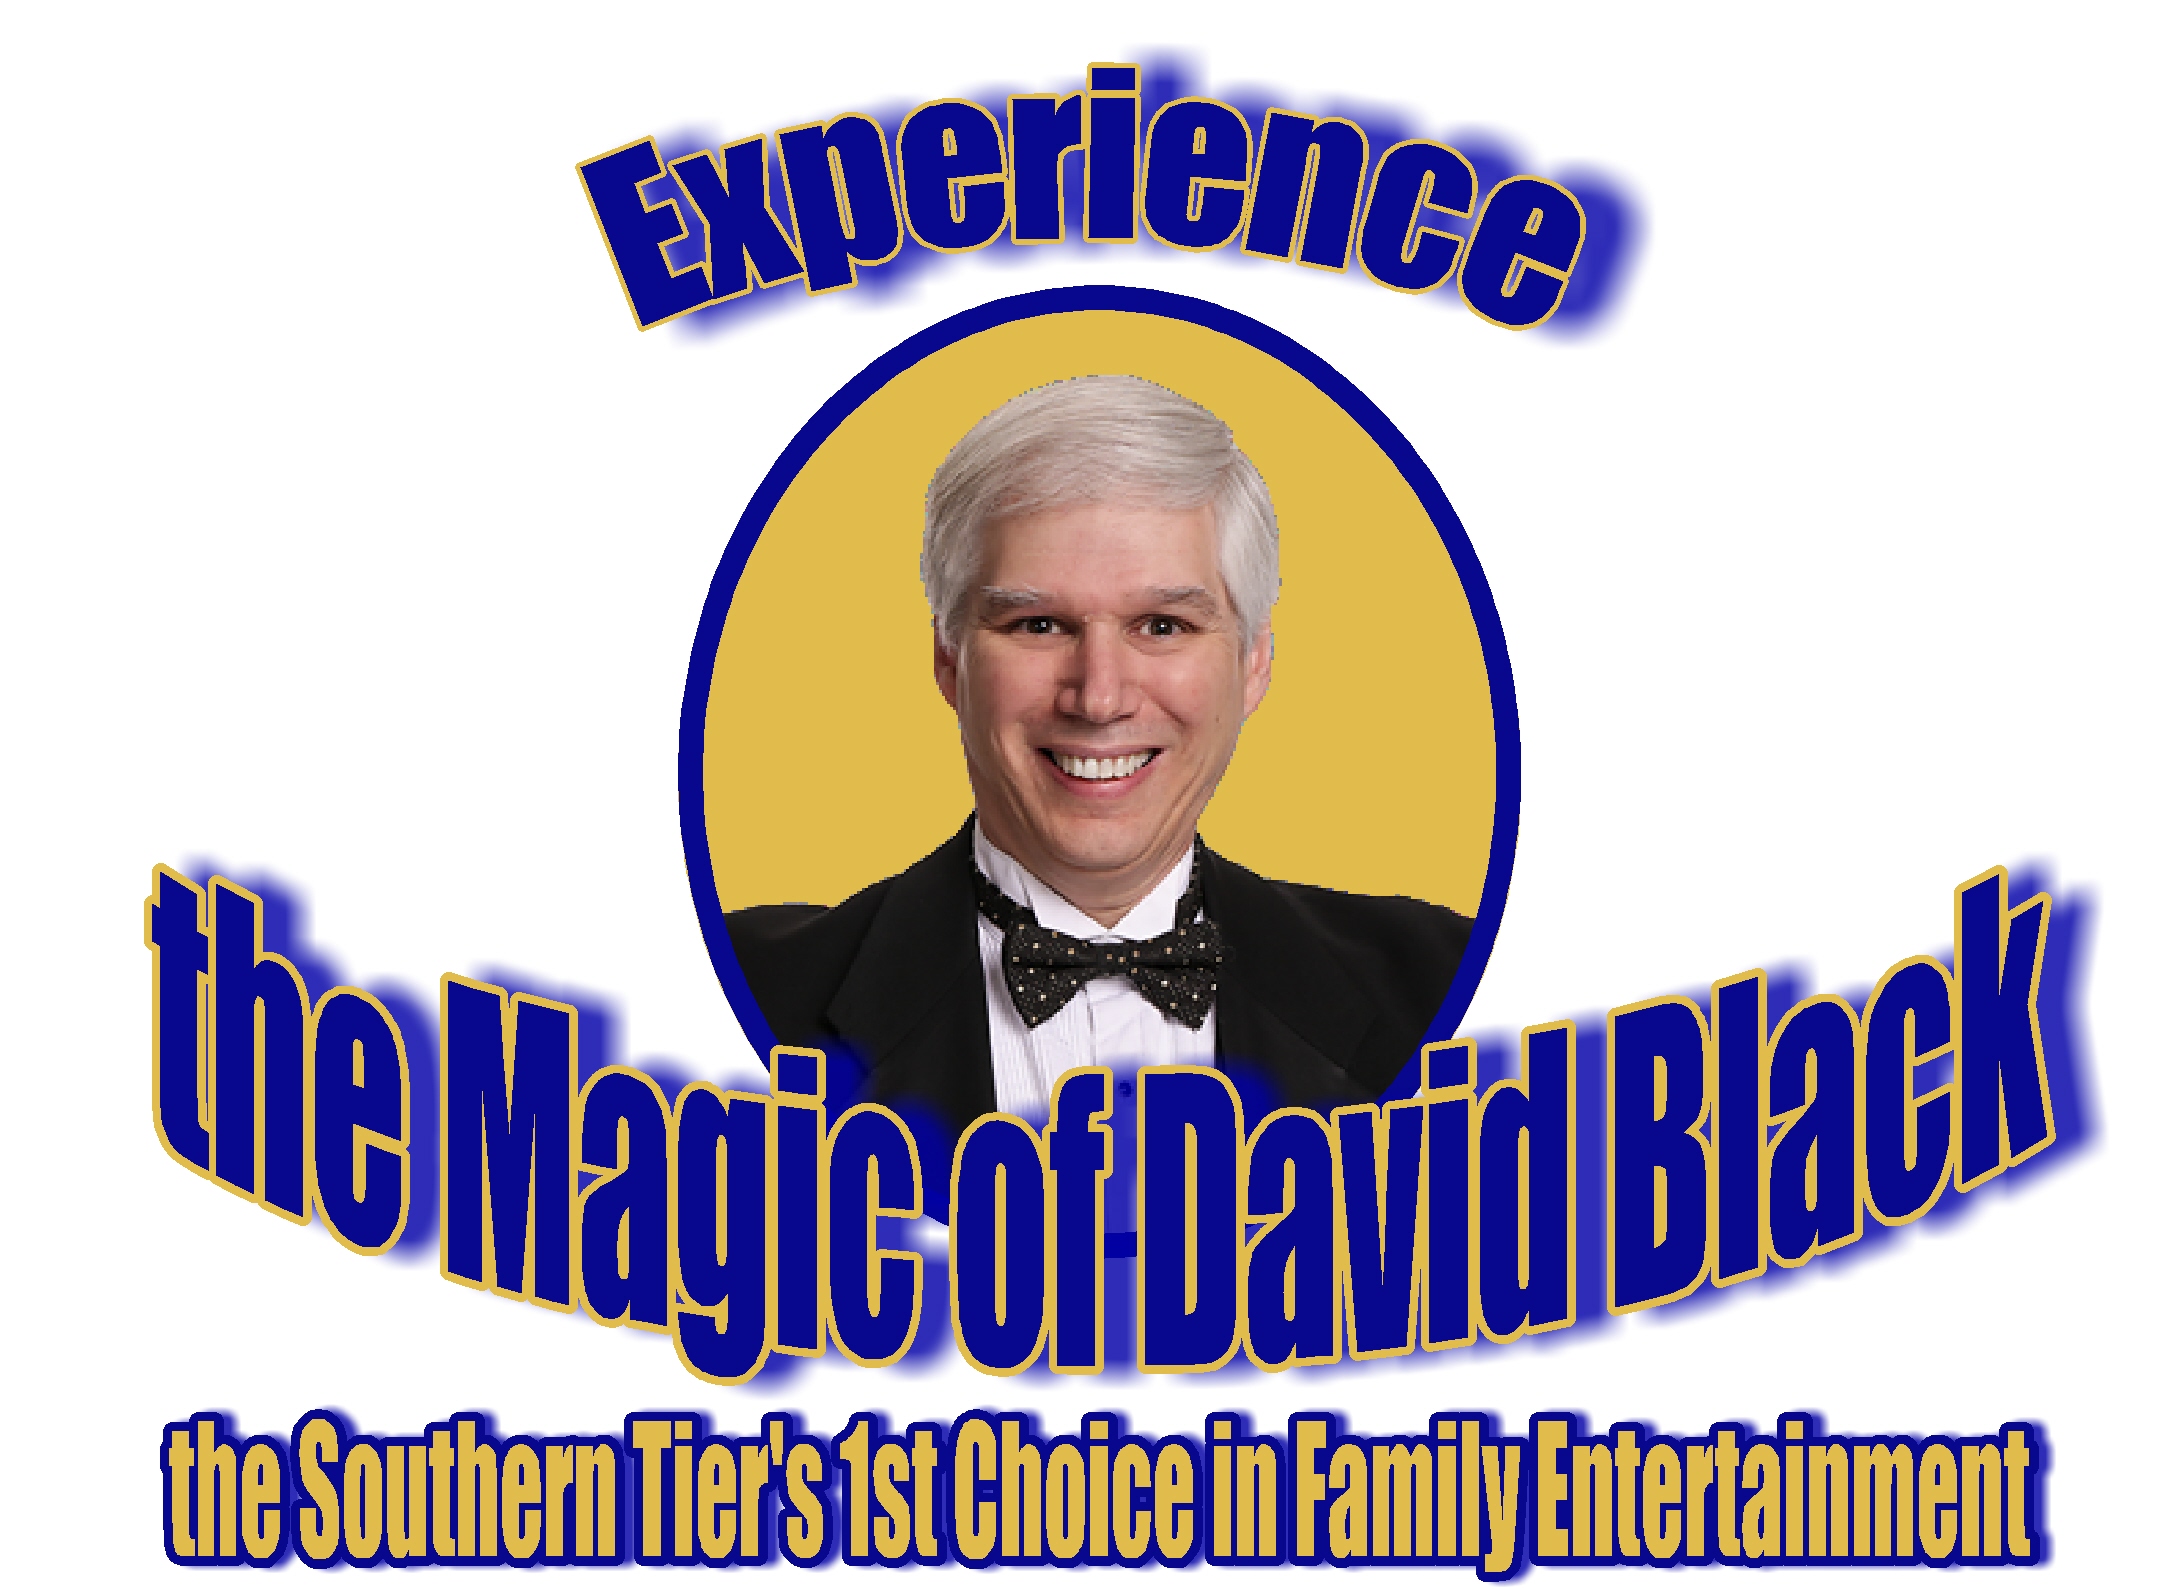 David Black the Southern Tier's 1st Choice in Family Entertainment